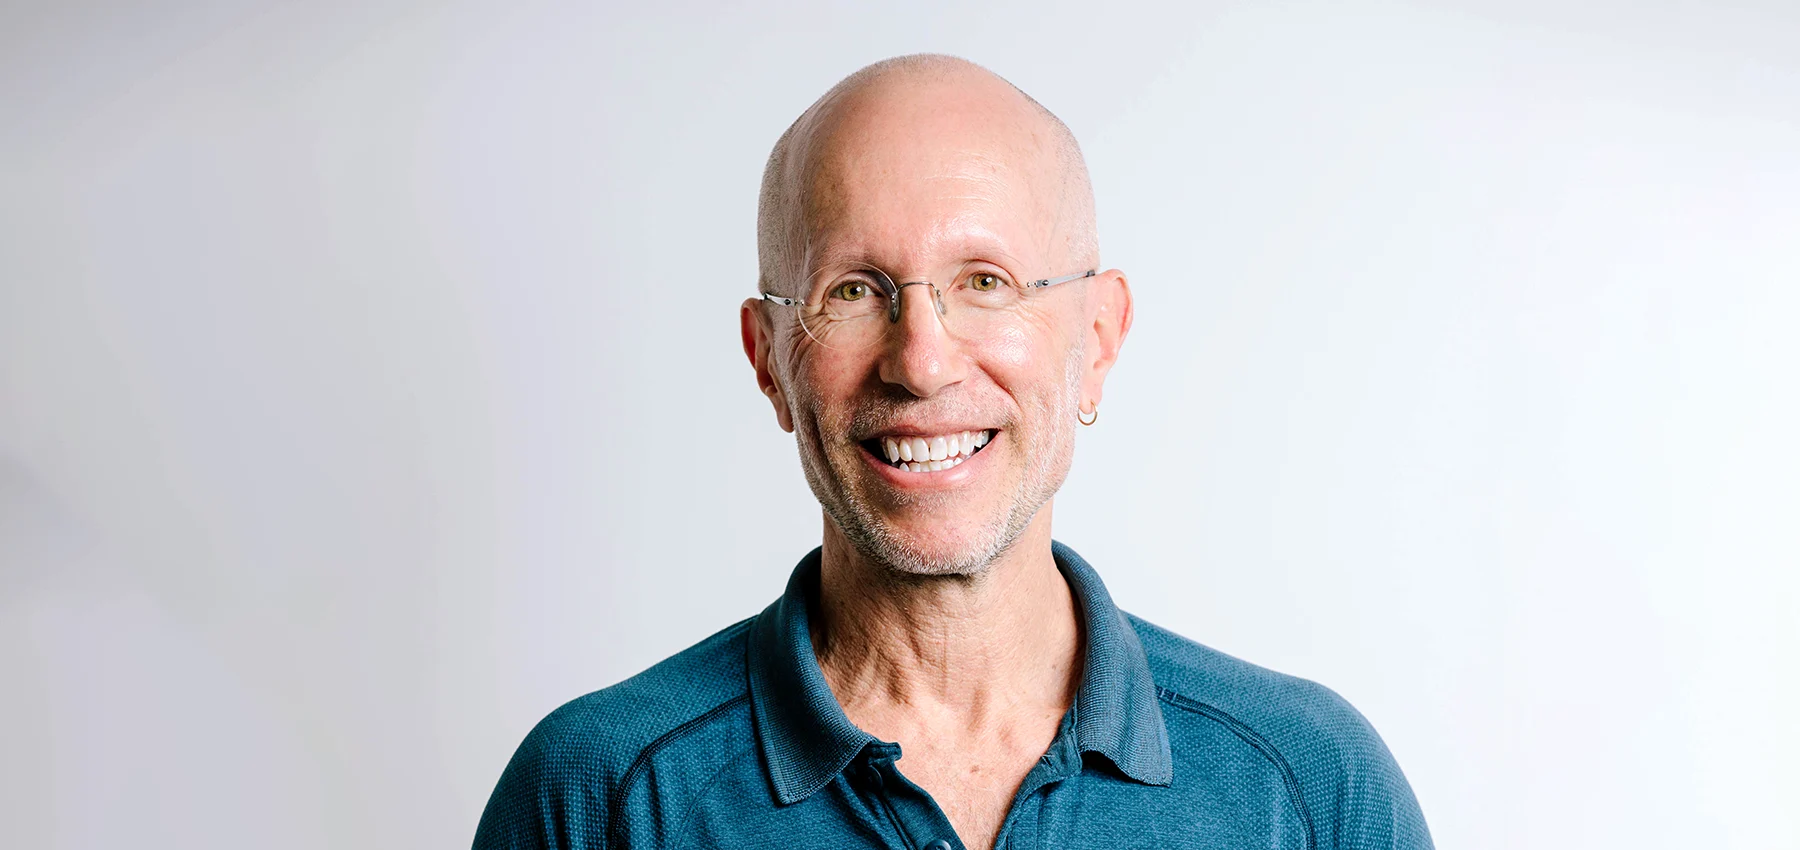 Podcast 174: Dr. Bill von Hippel on Human Nature &#038; Mental Wellbeing